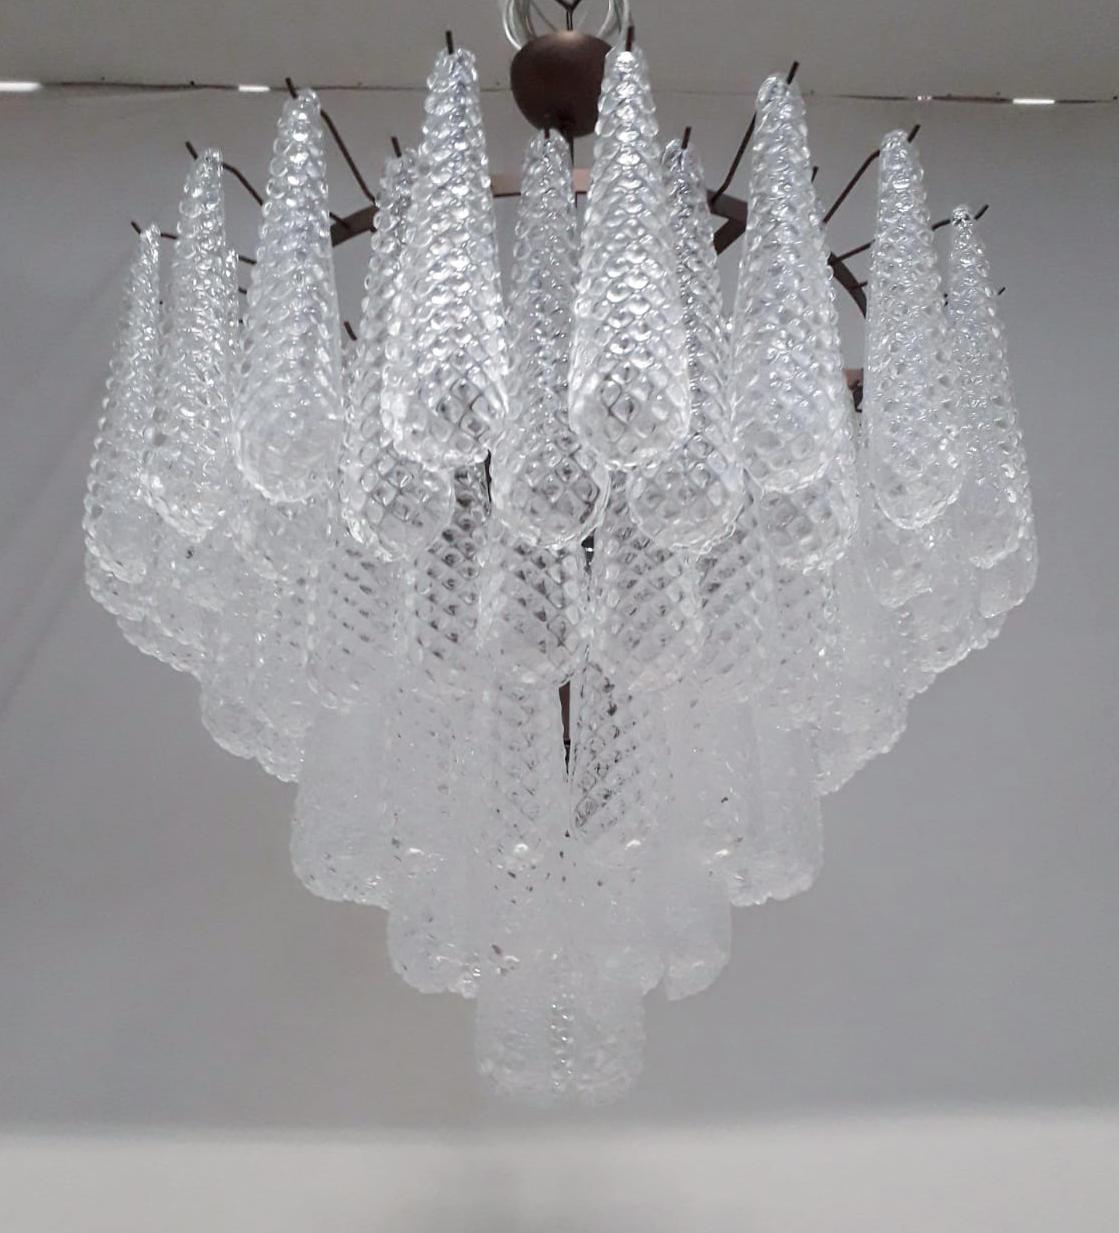 Italian chandelier shown with hand blown Murano etched tears glass drops, mounted on bronzed metal finish frame by Fabio Ltd / Made in Italy
10 lights / 9 in E26 or E27 type, max 60W each and 1 in E12 or E14 type, max 40W
Measures: diameter 31.5